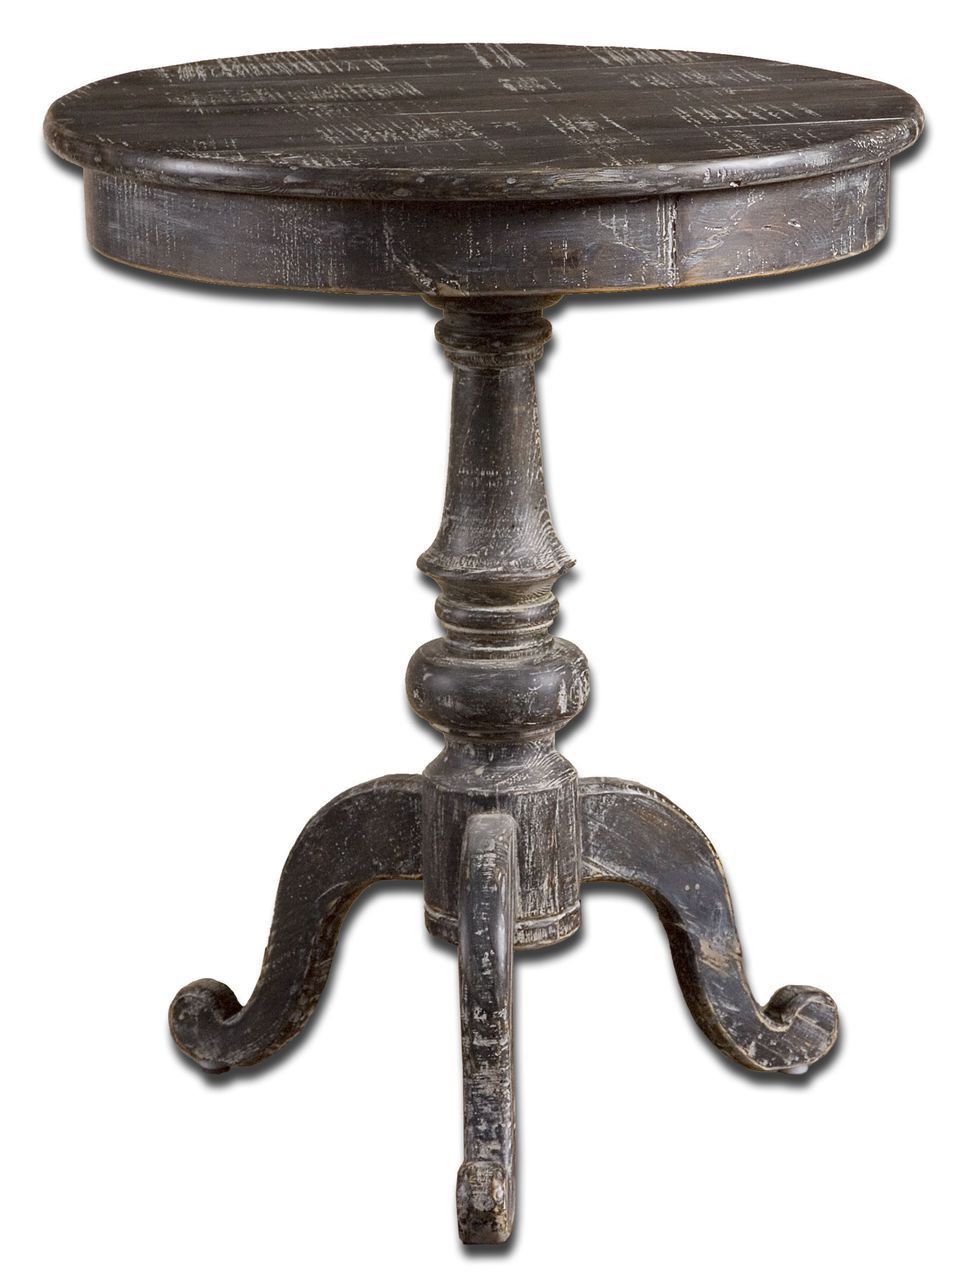 uttermost cadey reclaimed wood side table dong martel accent work light autumn runner quilt patterns inch round tablecloth small top lamps pennington furniture inexpensive patio